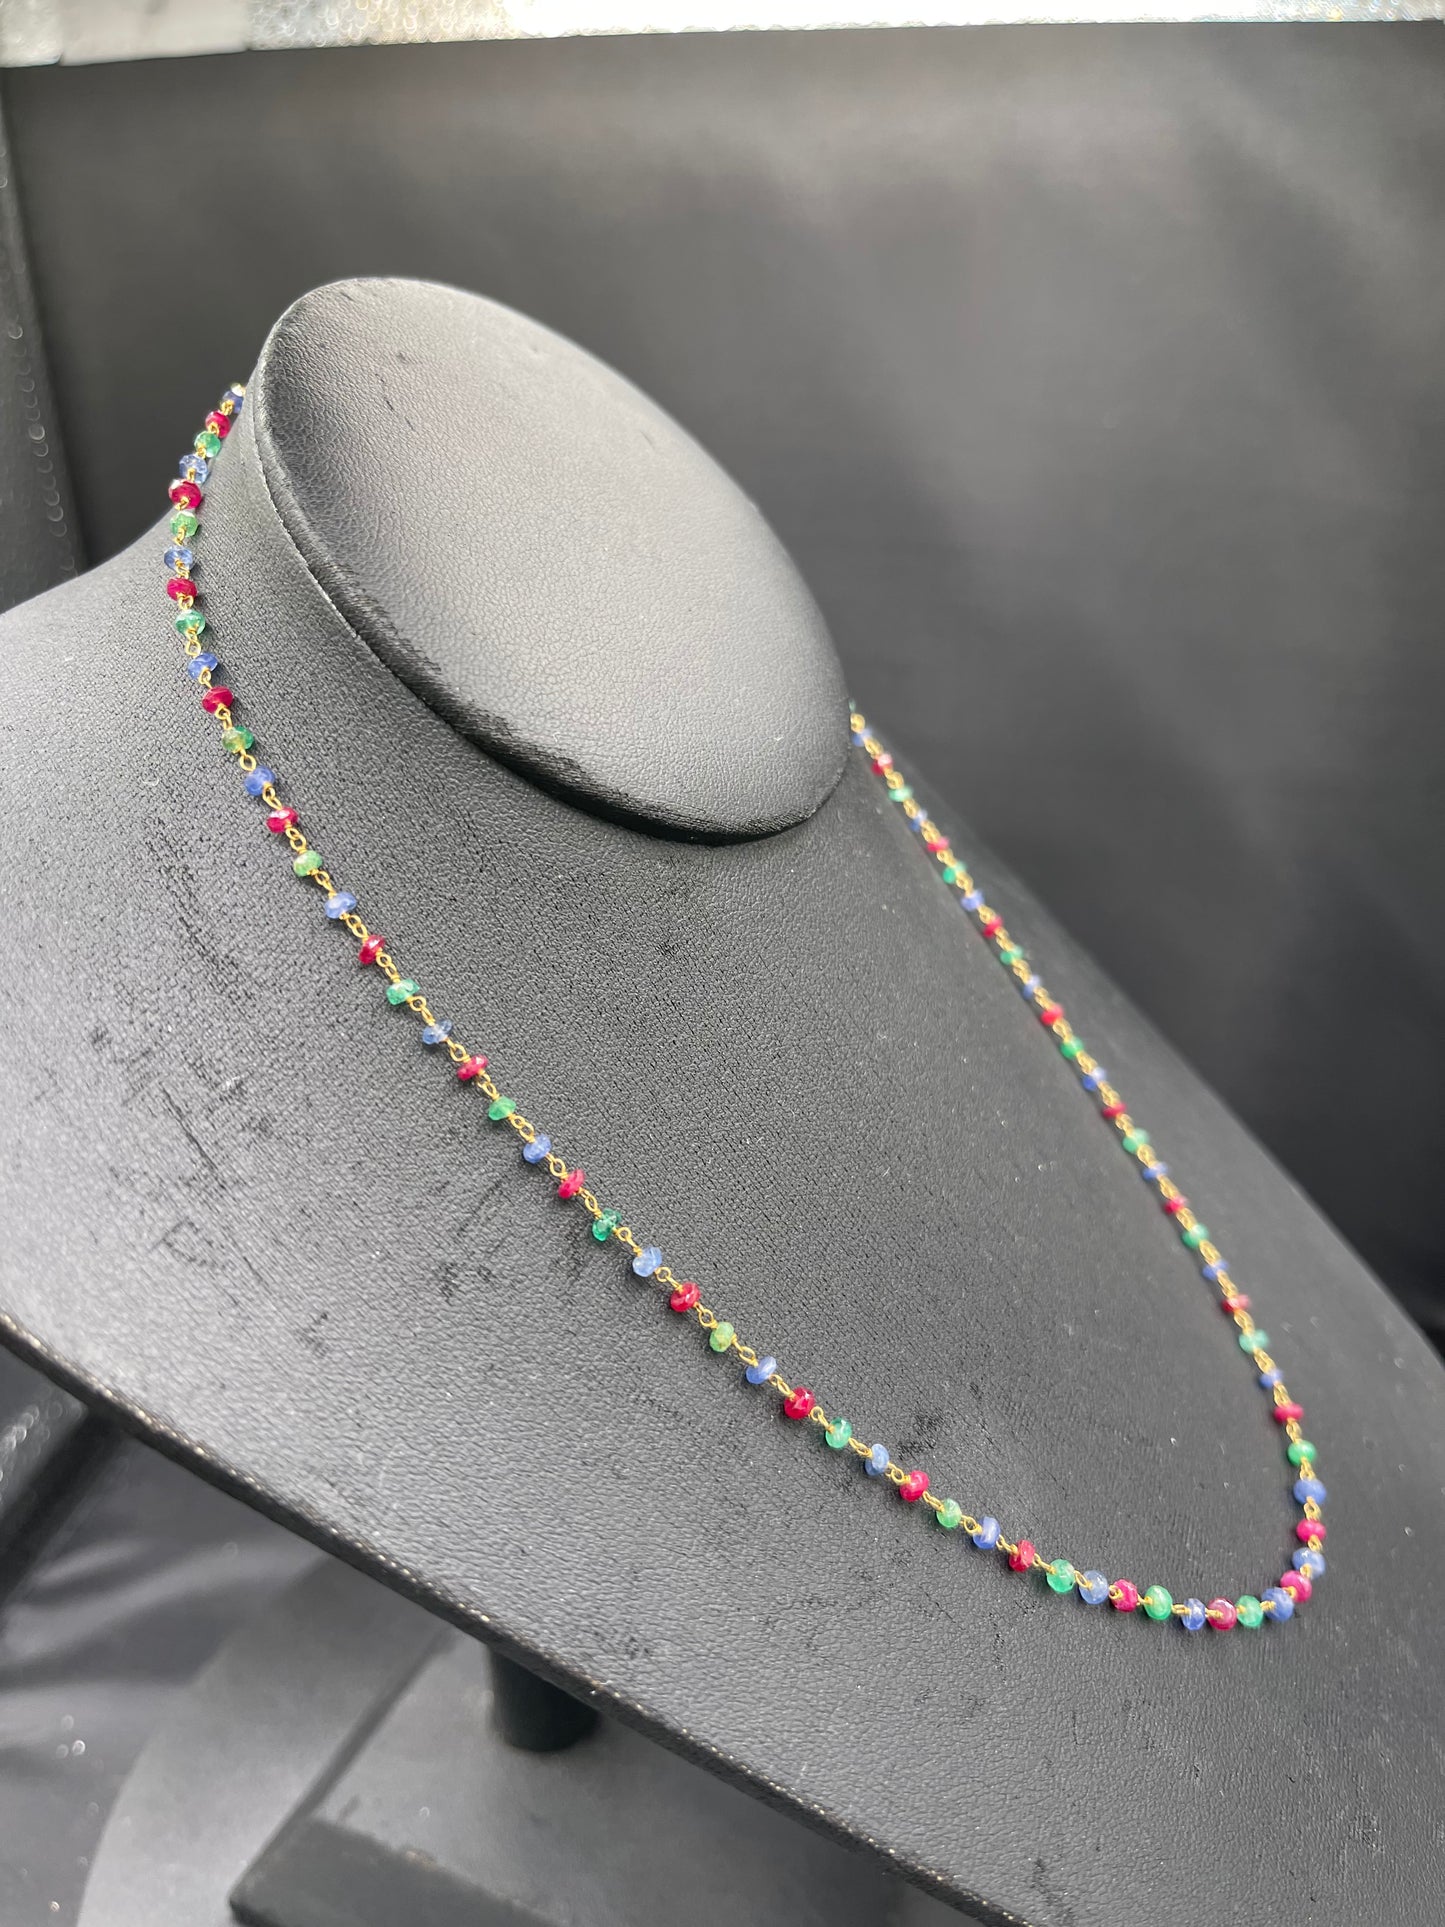 Faceted Ruby Emerald & Sapphire 18K Handmade Necklace (18 Inches)